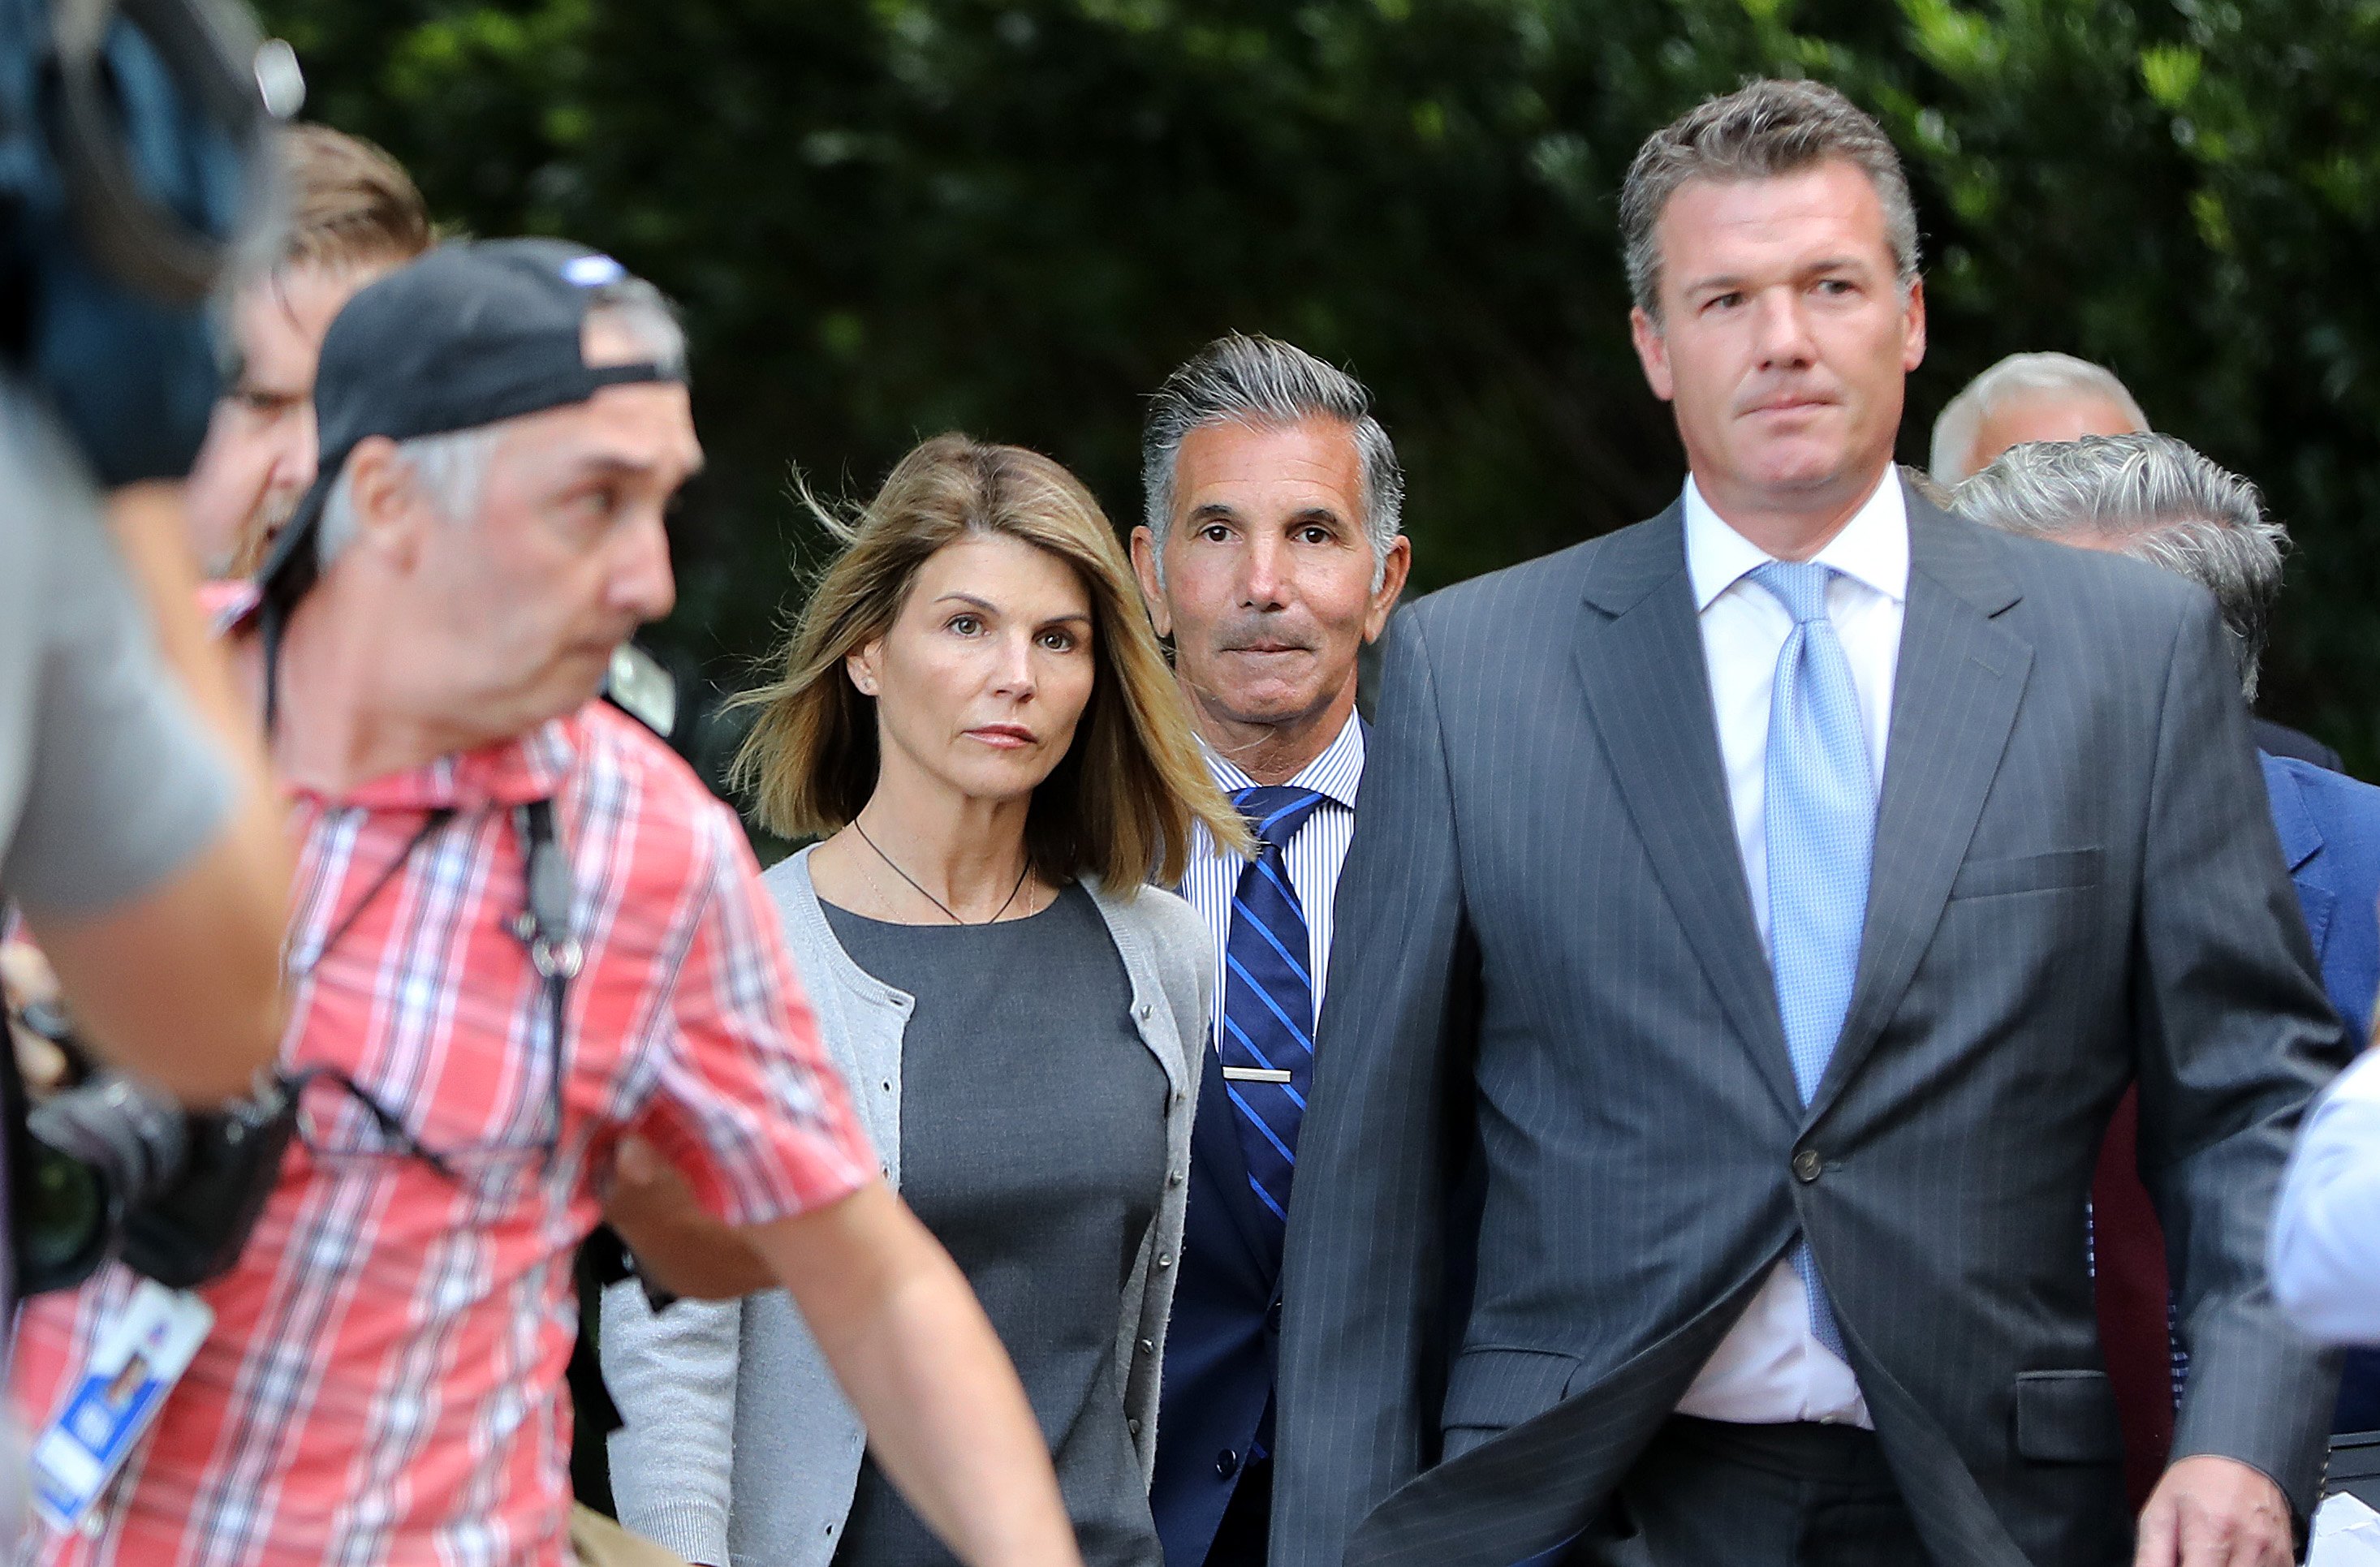 Lori Loughlin and Mossimo Giannulli surrounded by lawyers and reporters outside courthouse